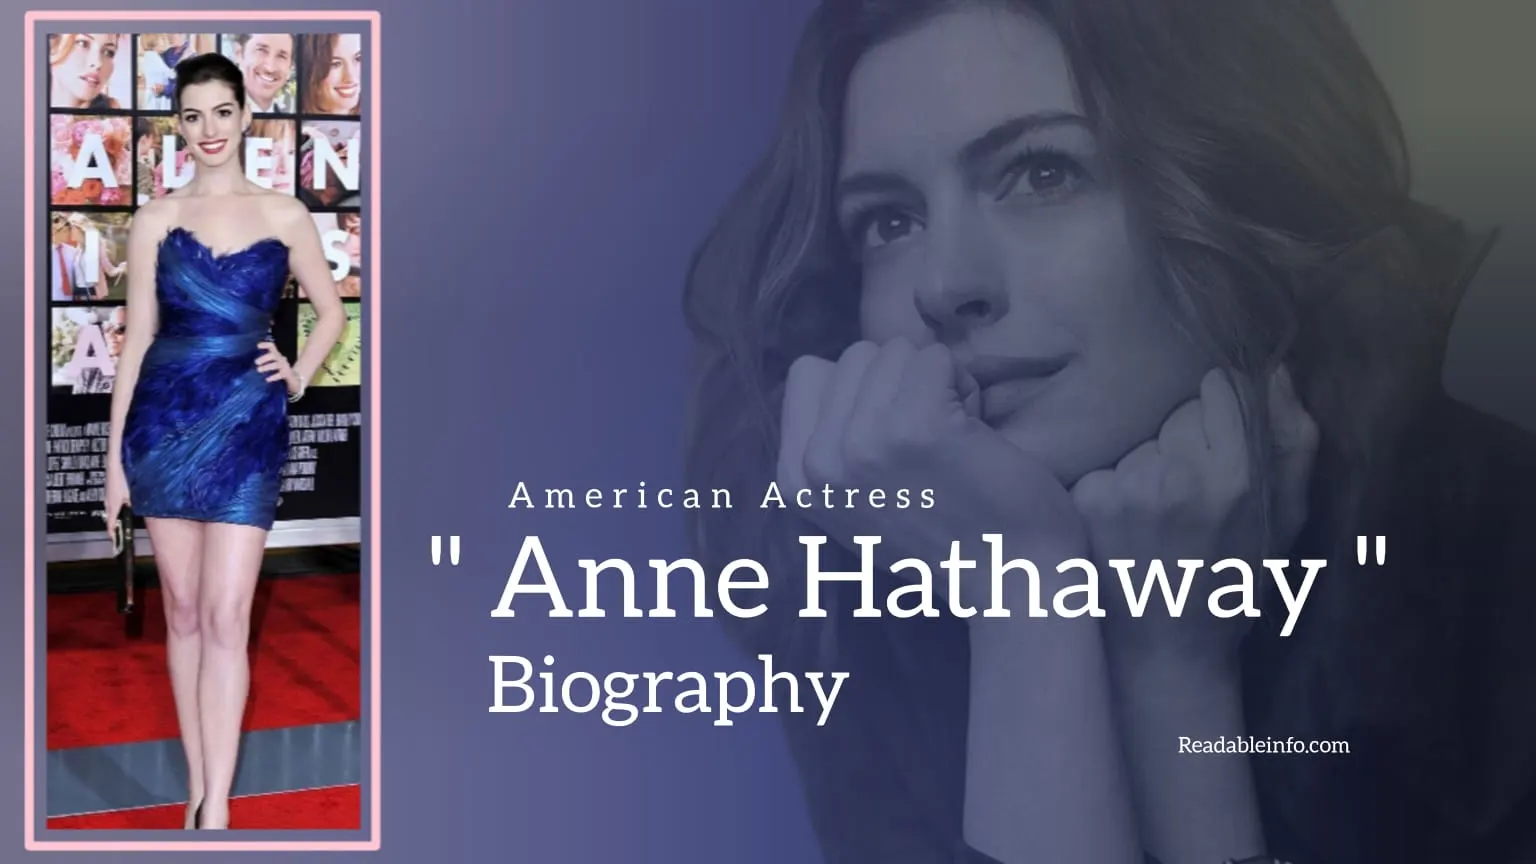 You are currently viewing Anne Hathaway Biography (American Actress)